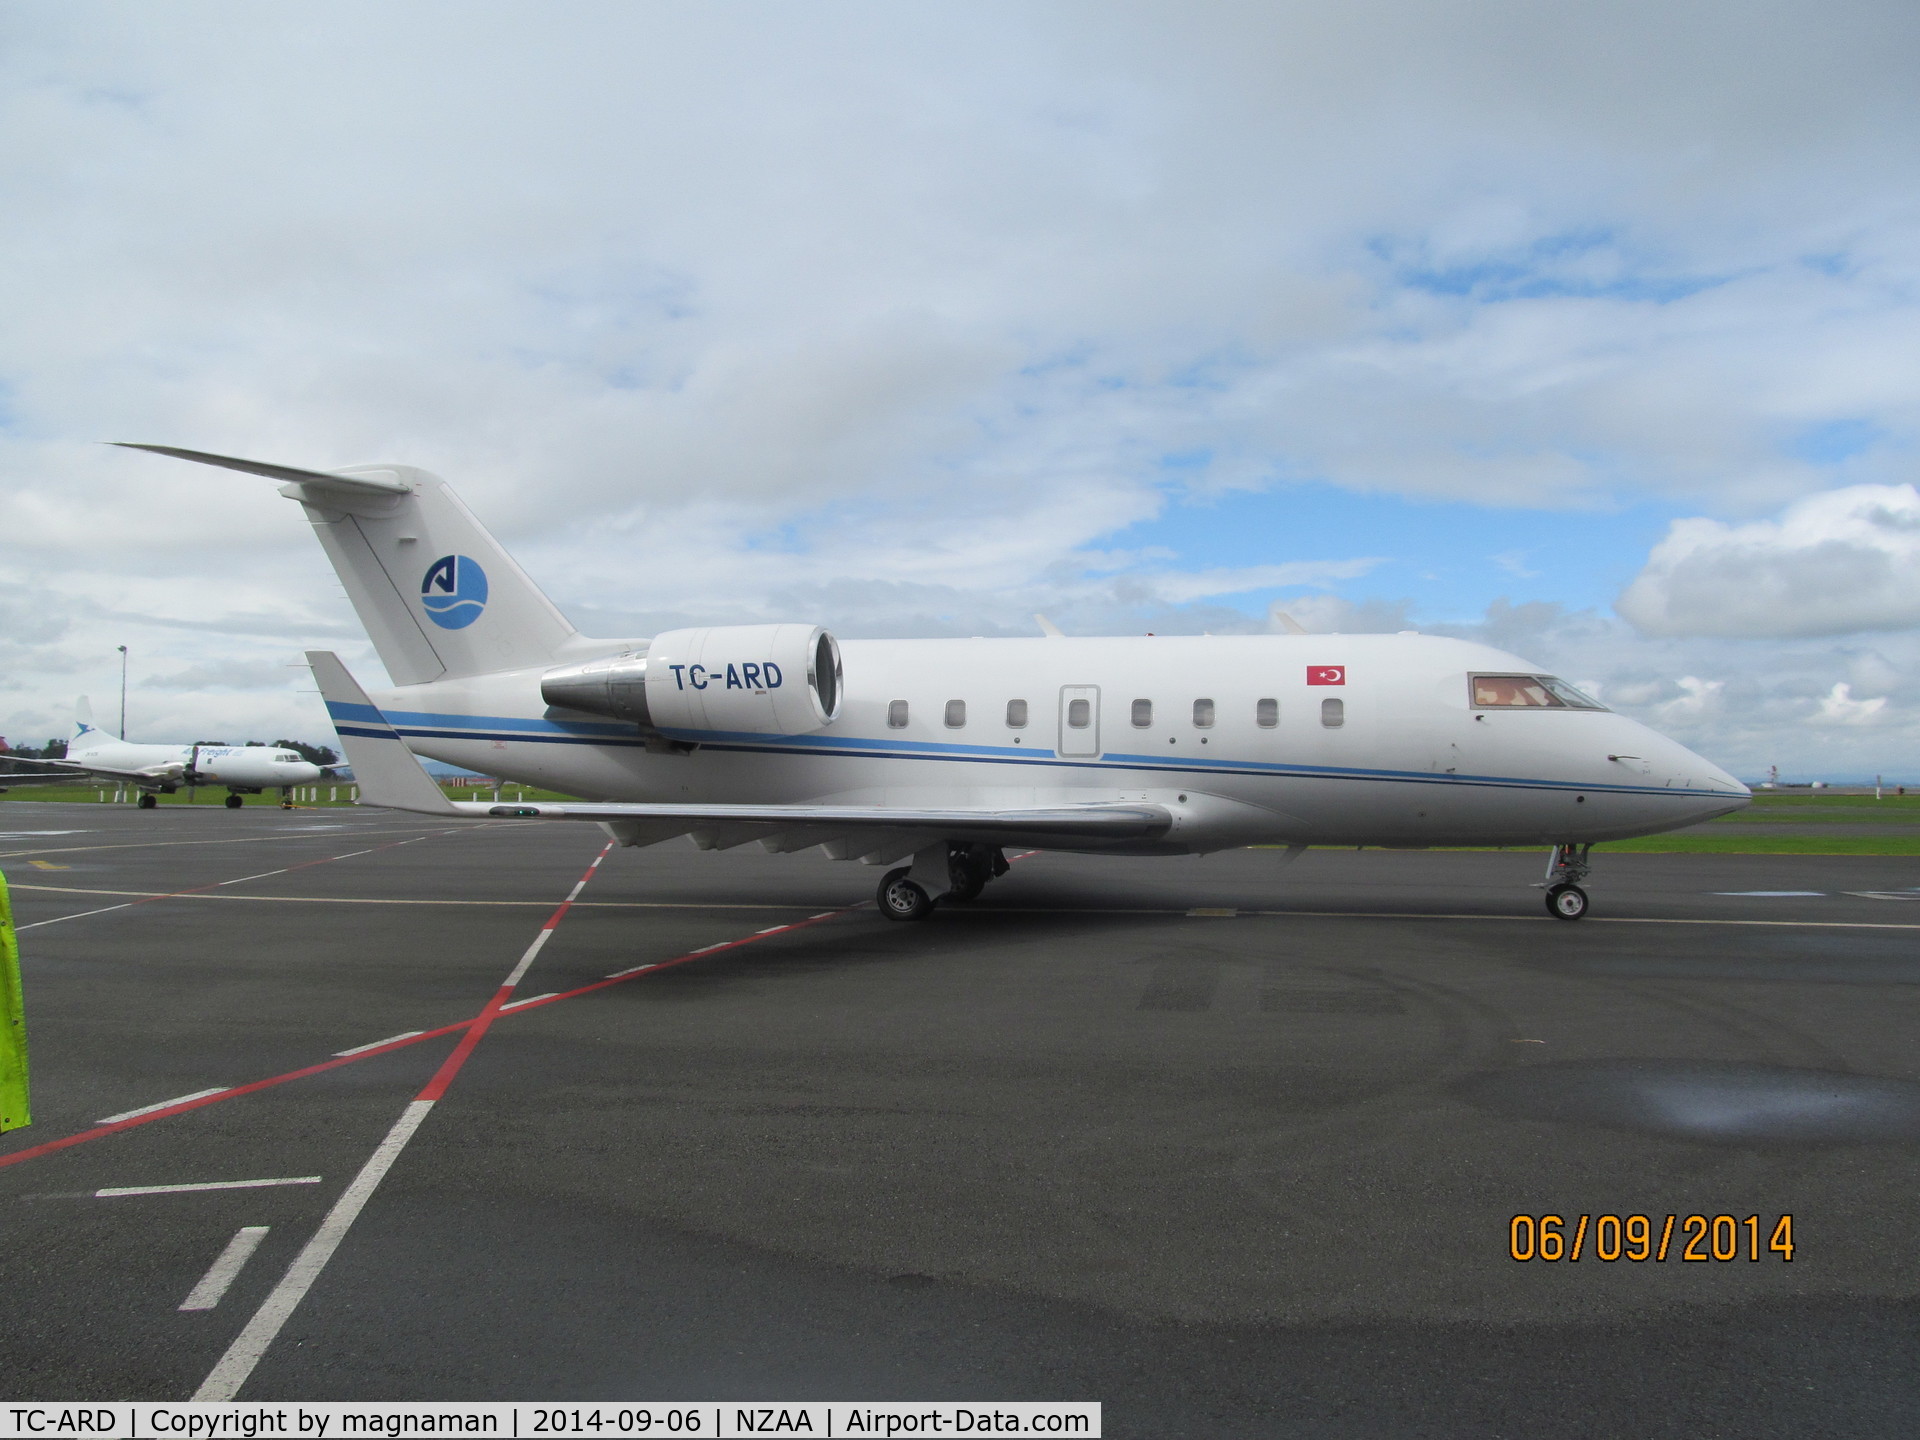 TC-ARD, 2005 Bombardier Challenger 604 (CL-600-2B16) C/N 5611, arriving at AKL